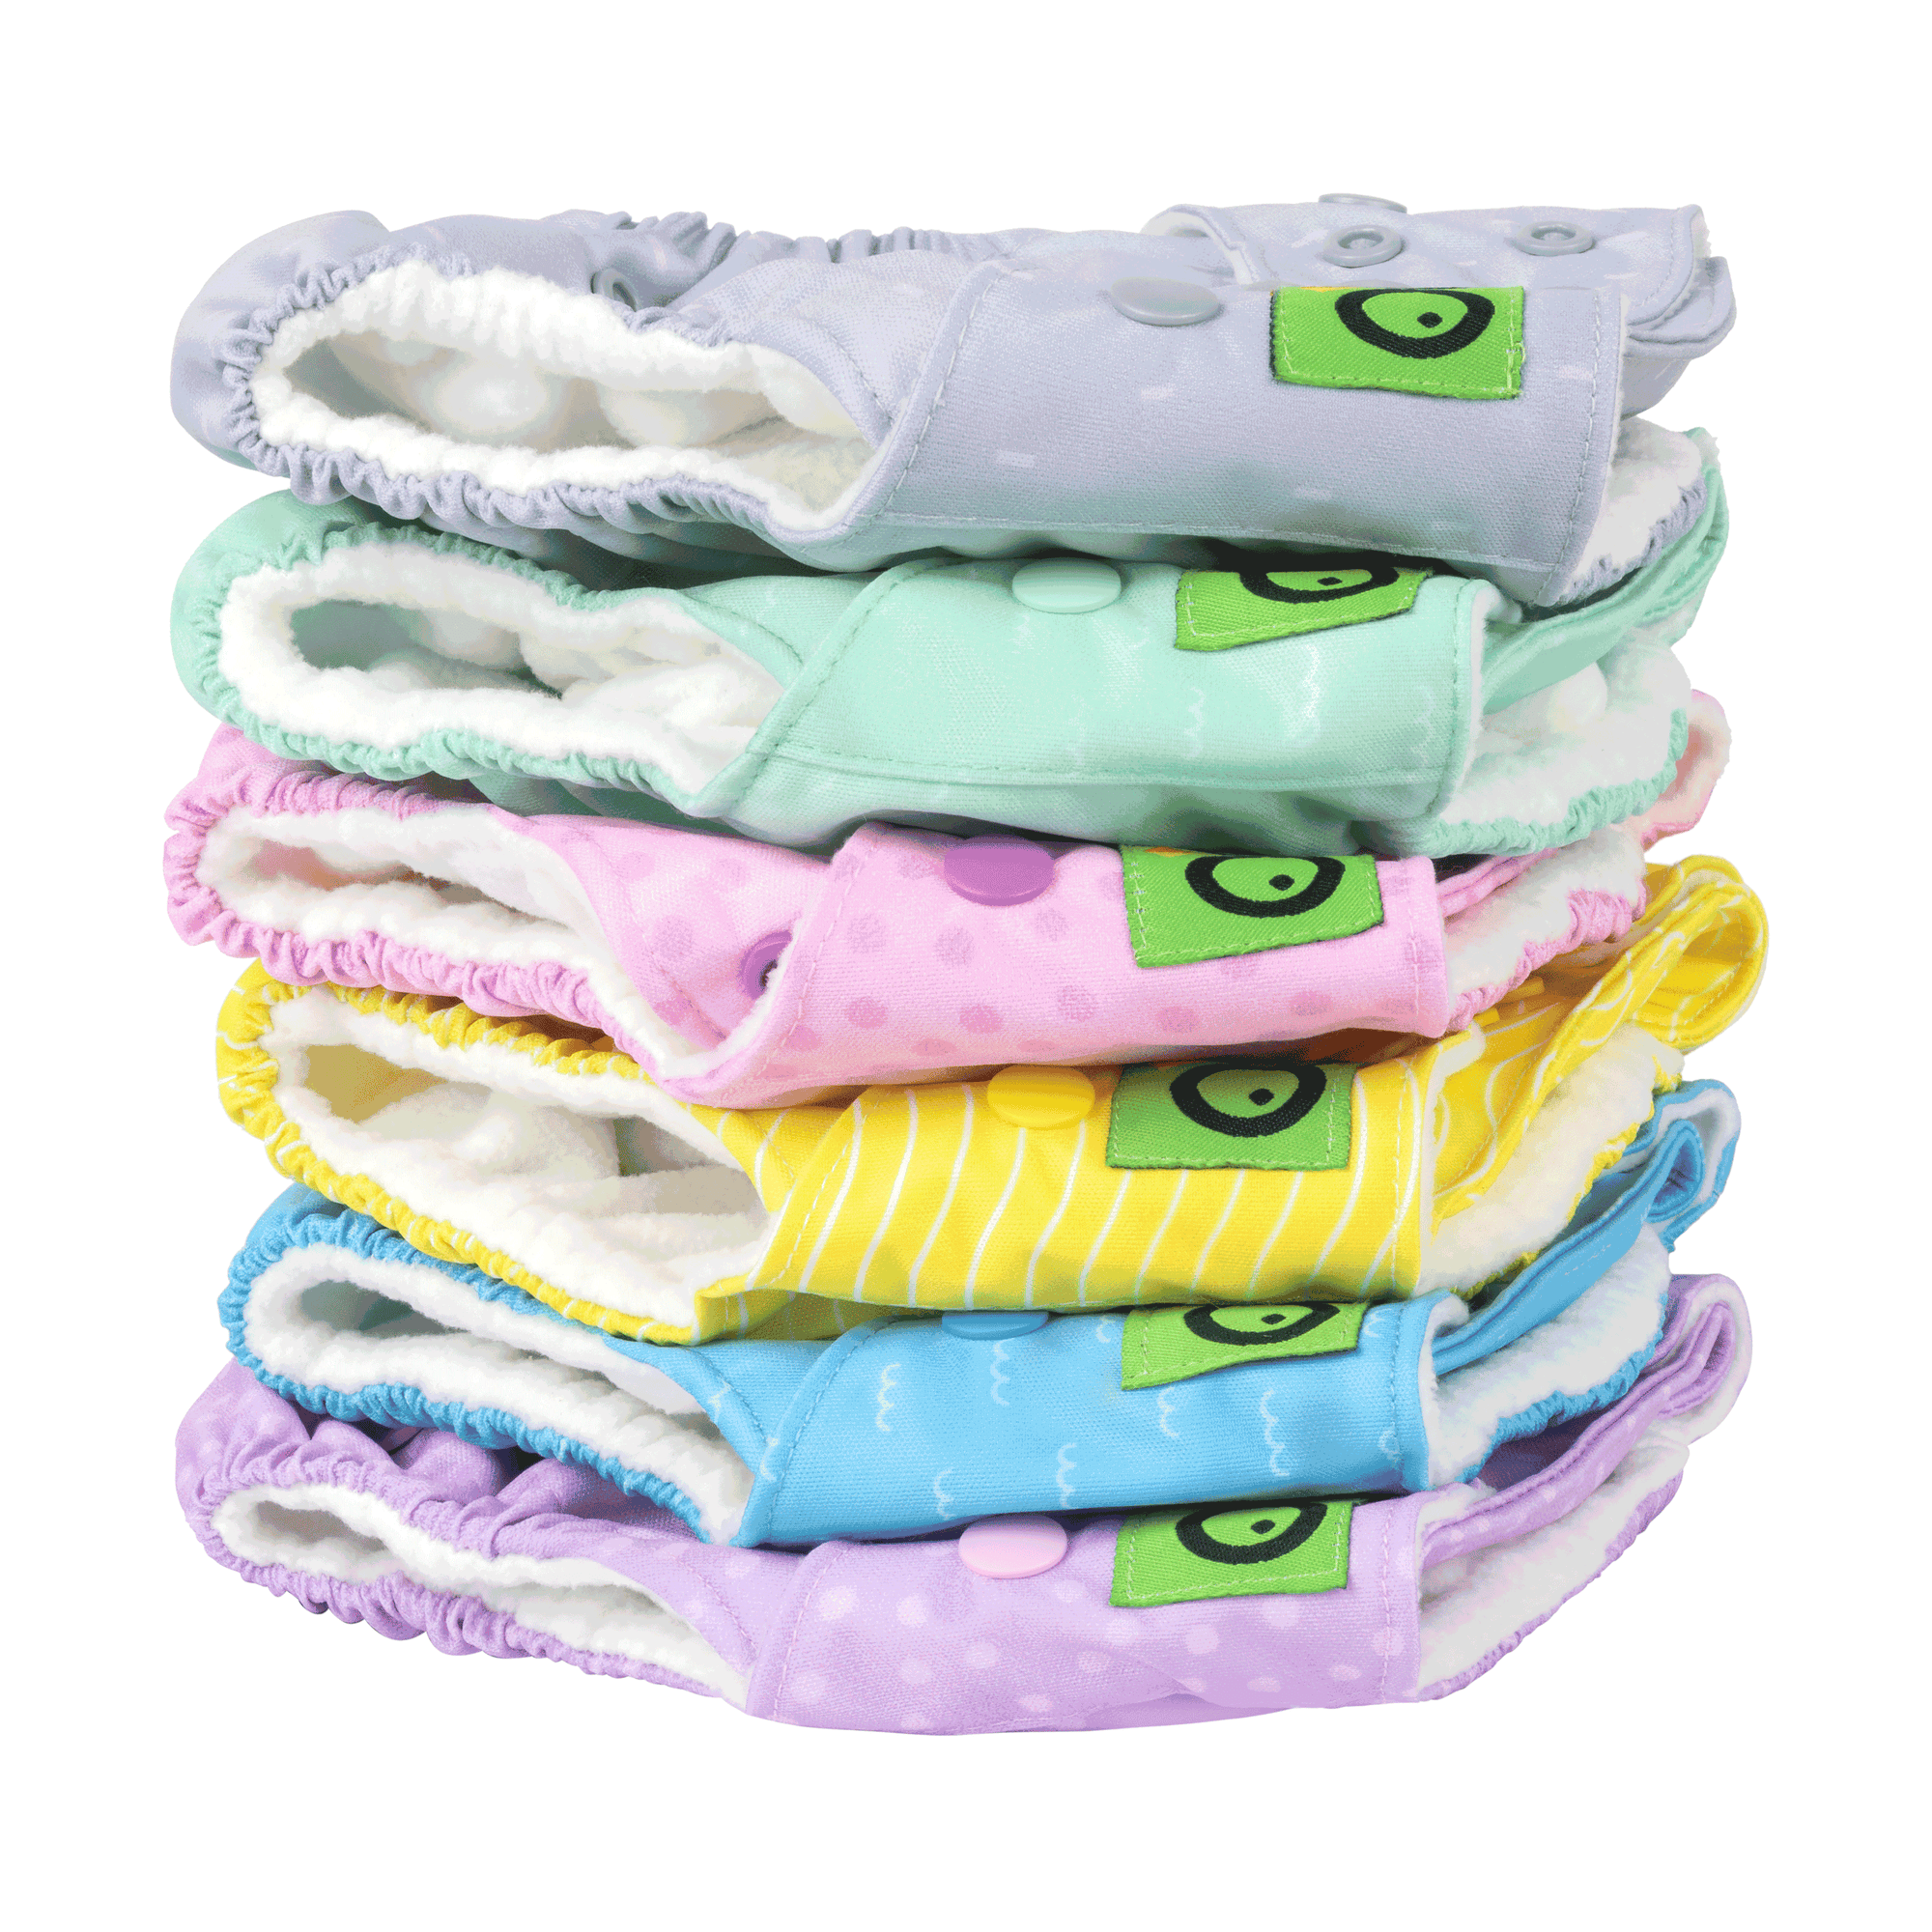 TINY LOOKS washable diaper,plastic diapers for baby reusable,baby plastic  diaper,elastic diaper,inside and outside plastic diaper,kids plastic  diaper,baby kids pvc plastic diaper,plastic diaper organizer,plastic diaper  pants reusable,plastic daiper